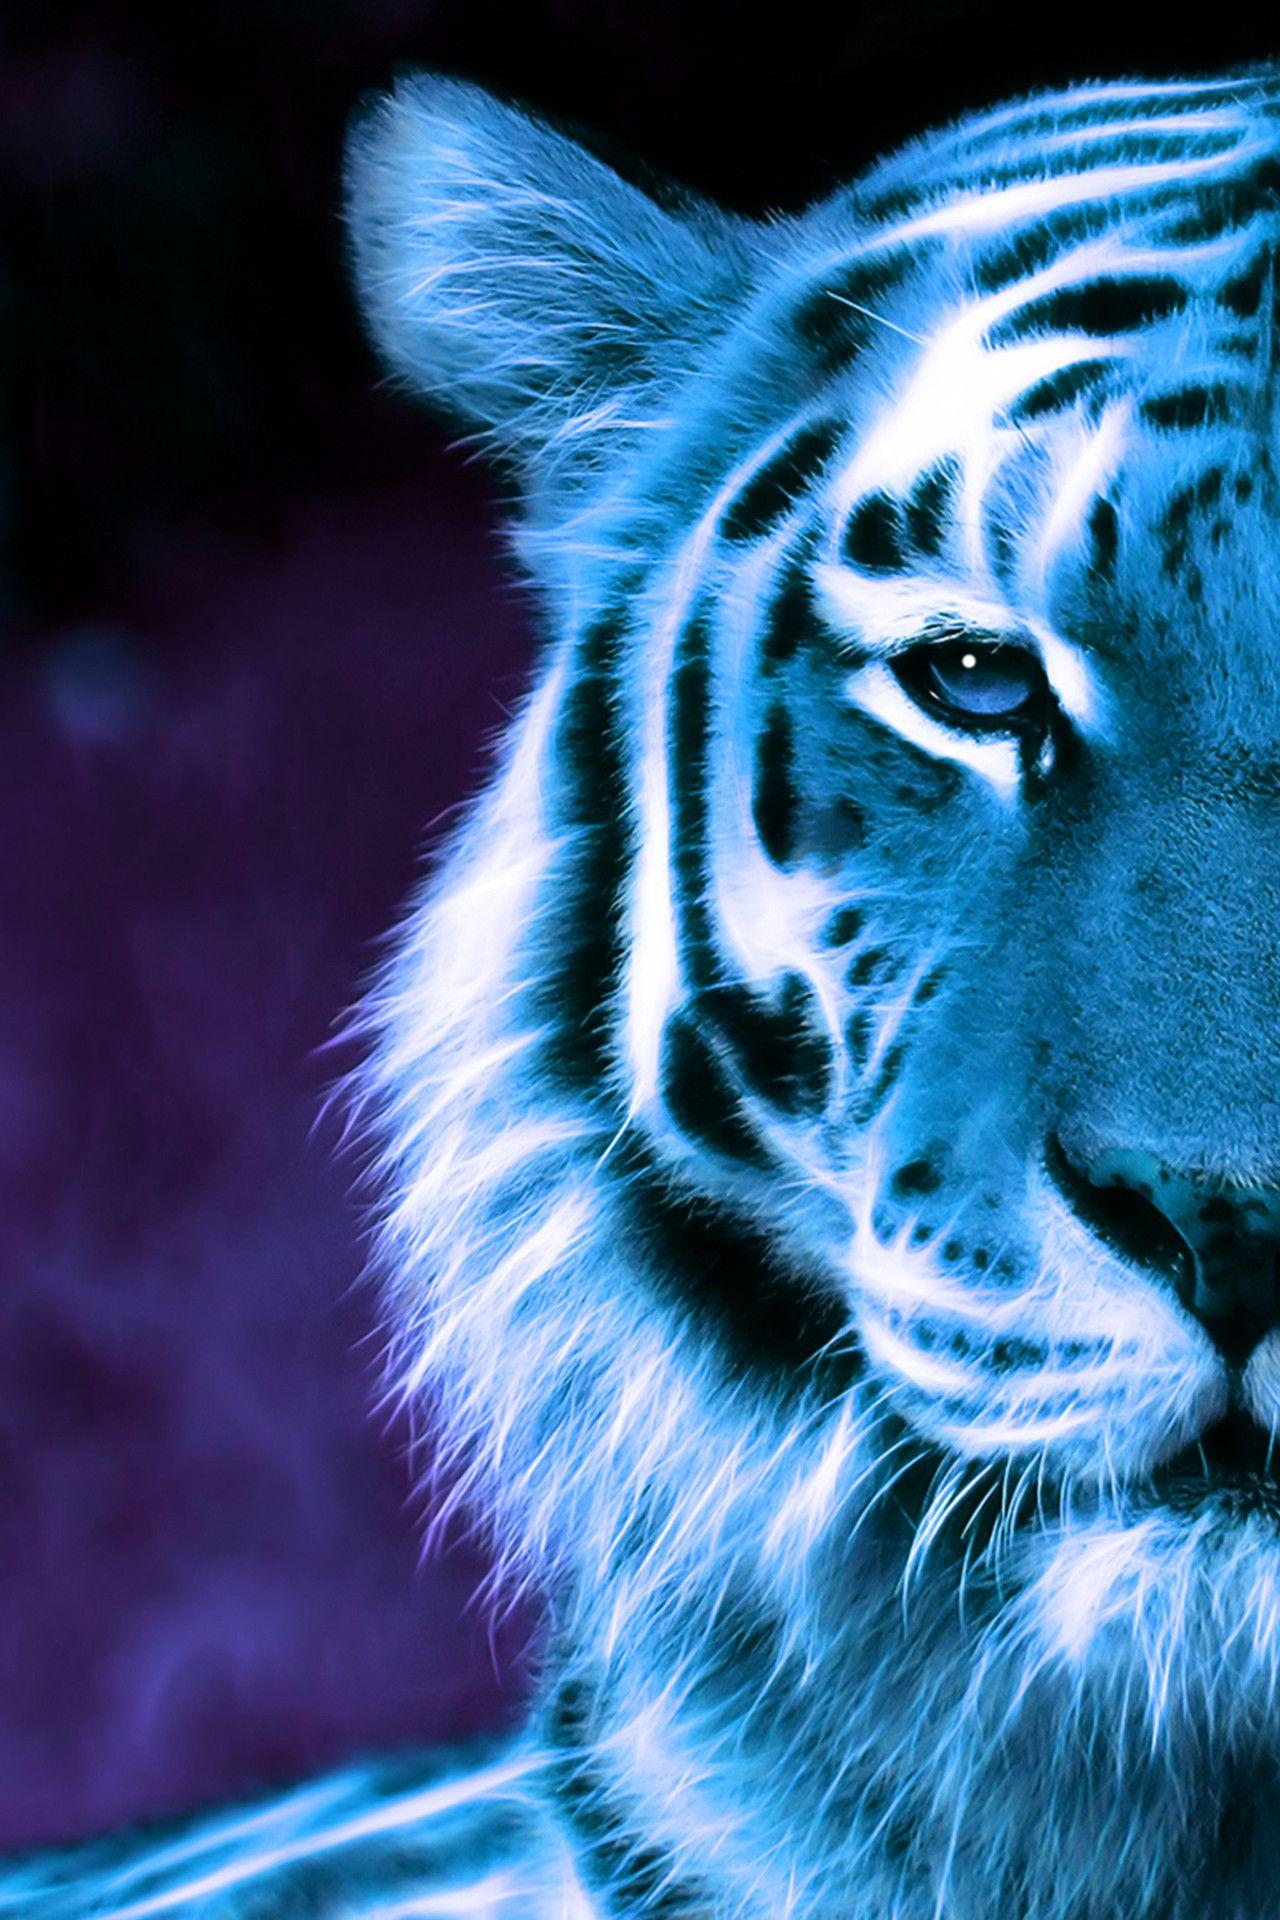 Electric Blue Tiger wallpaper by YomiKiyomi  Download on ZEDGE  a1e2